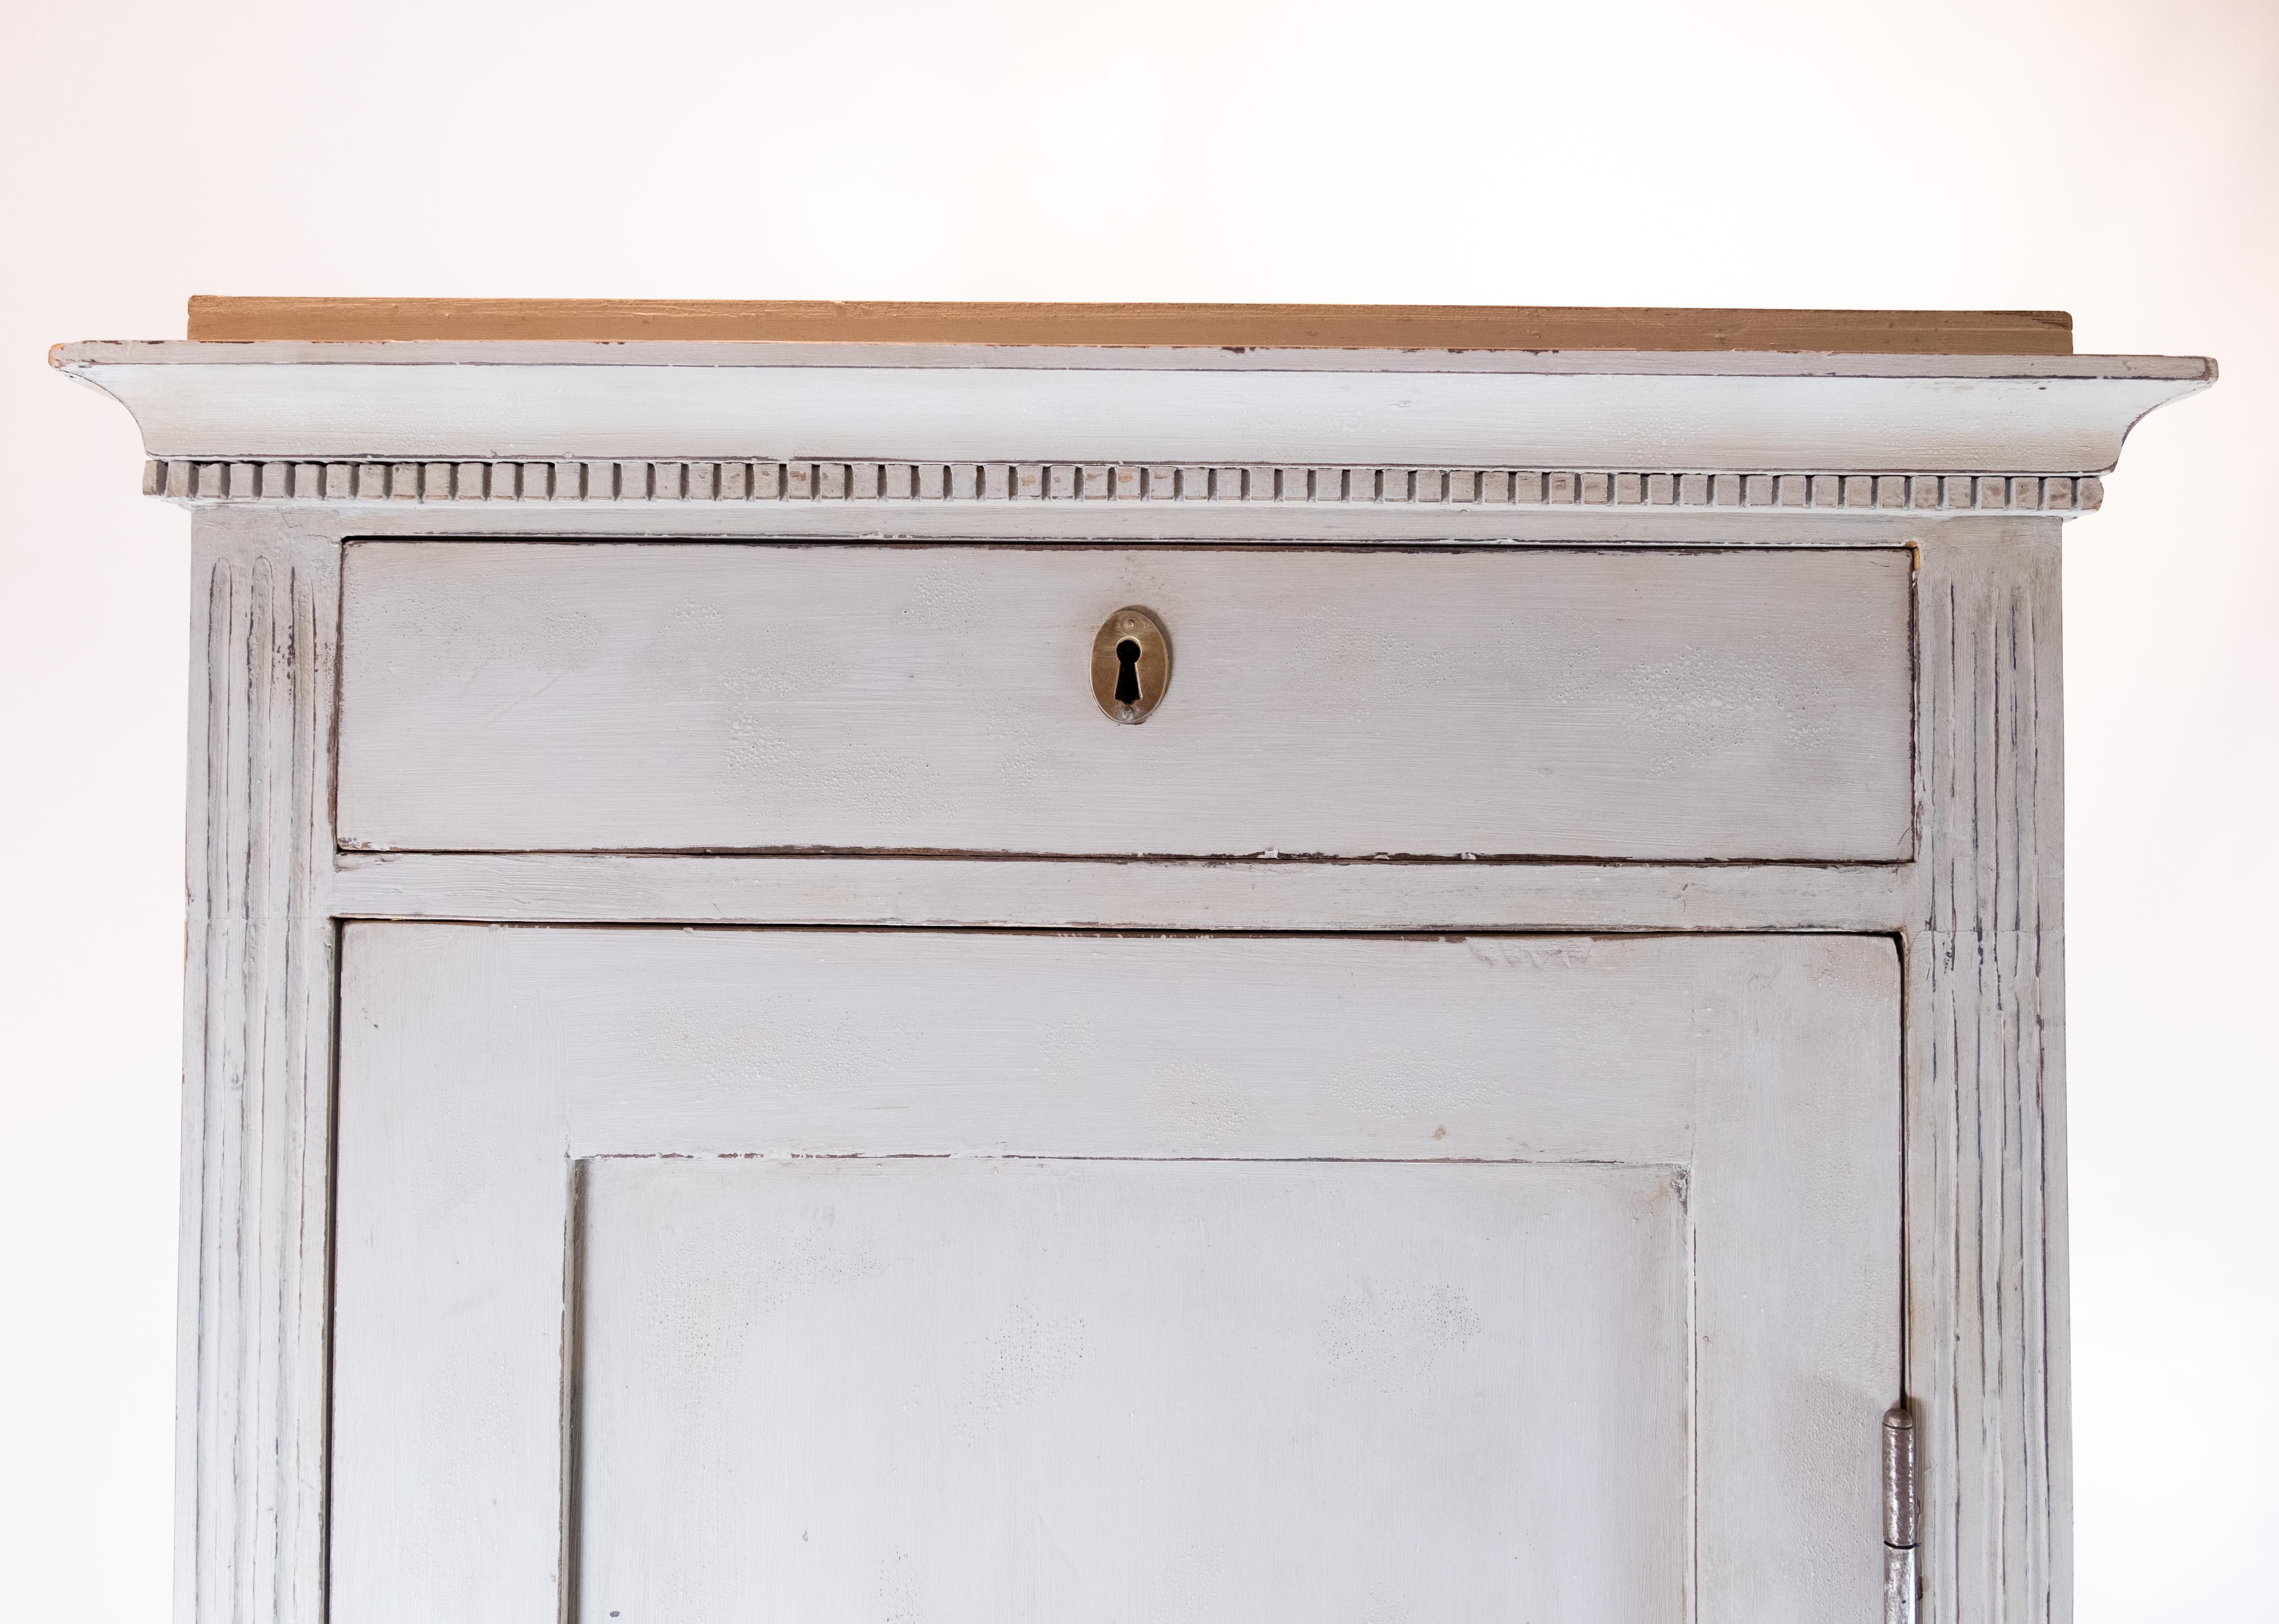 Danish Grey Painted Gustavian Tall Cabinet, in Great Condition from the 1840s